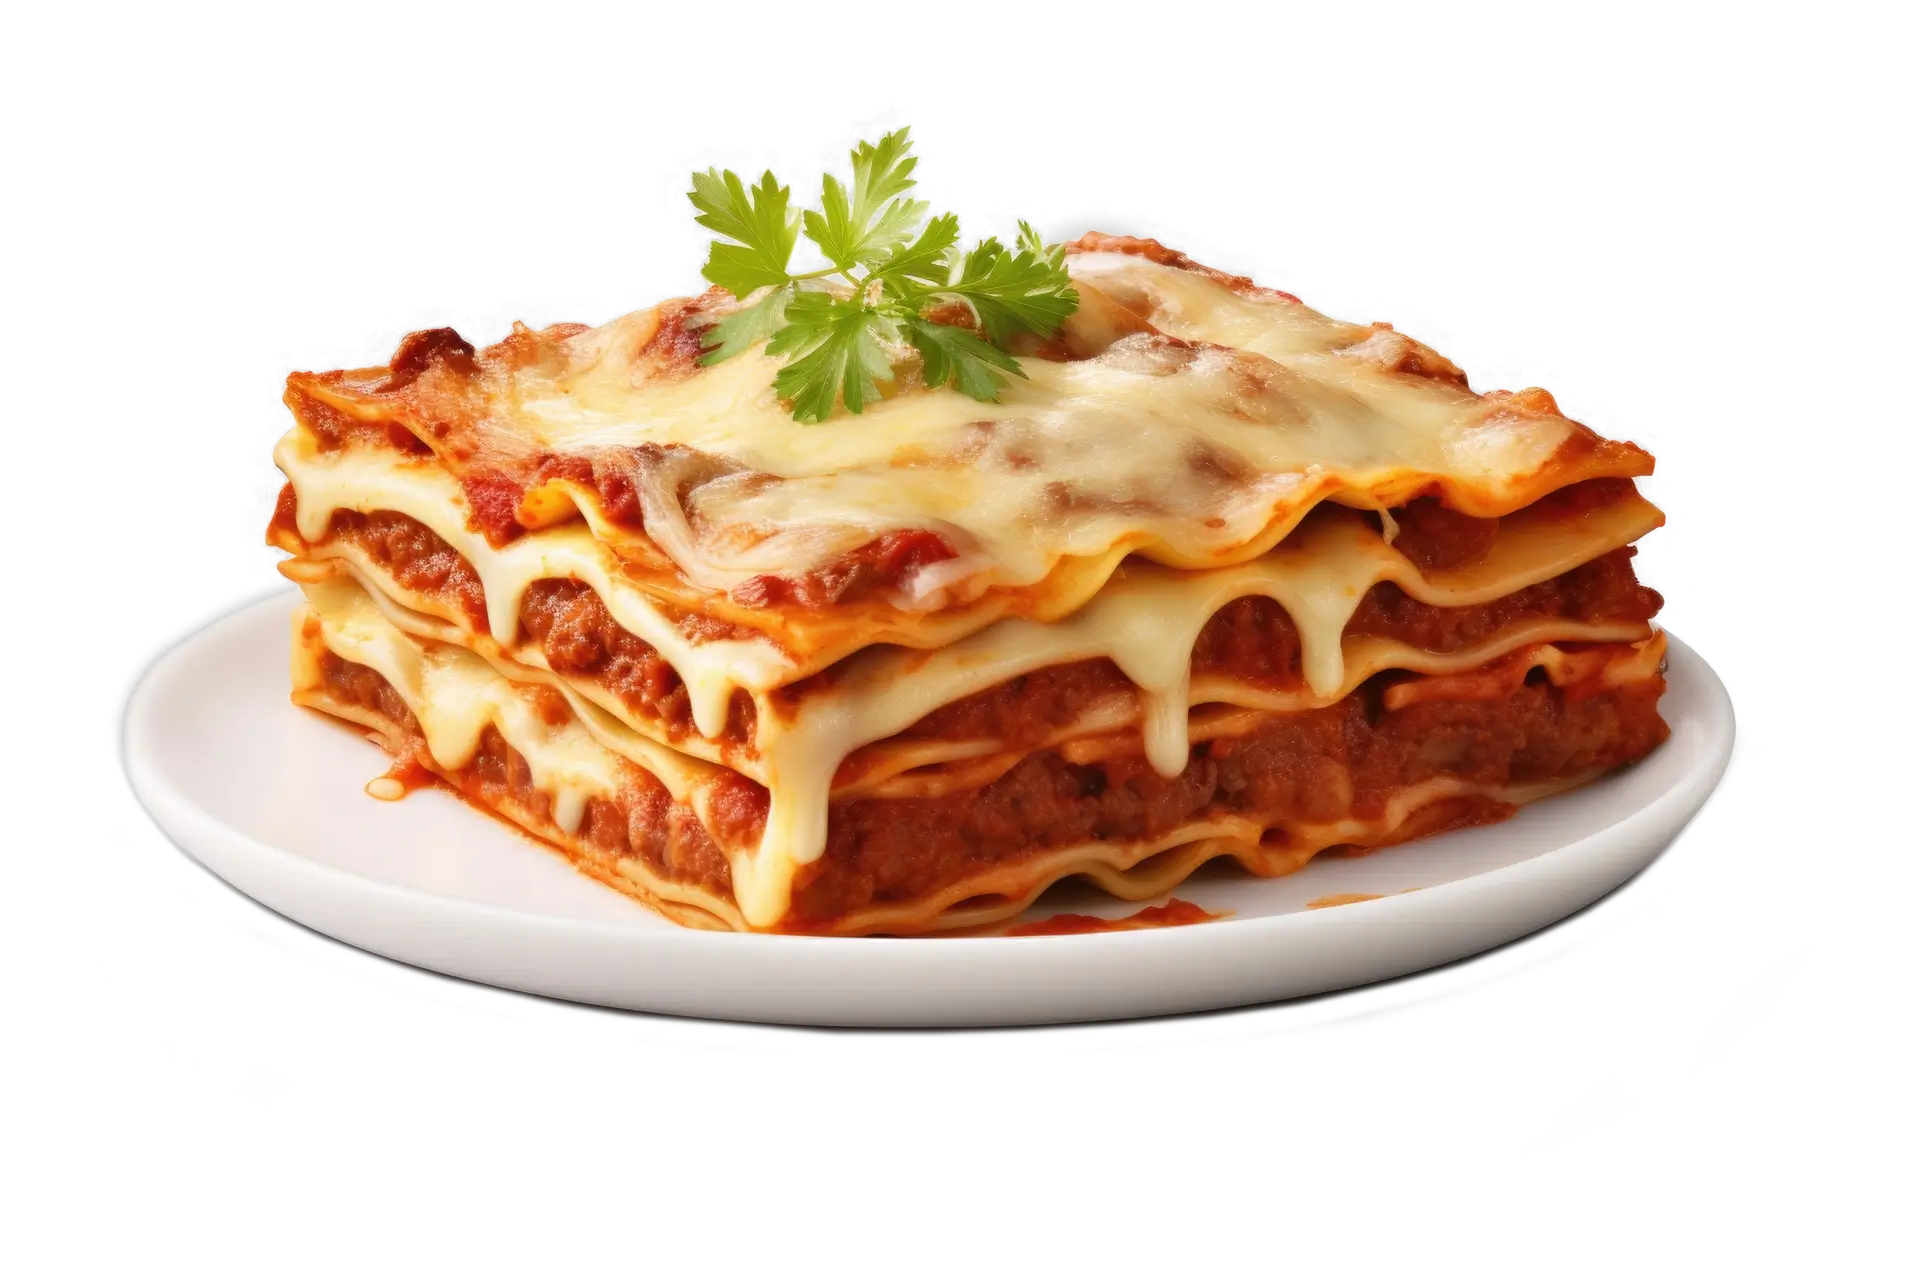 Delicious lasagna with layers of pasta and cheese